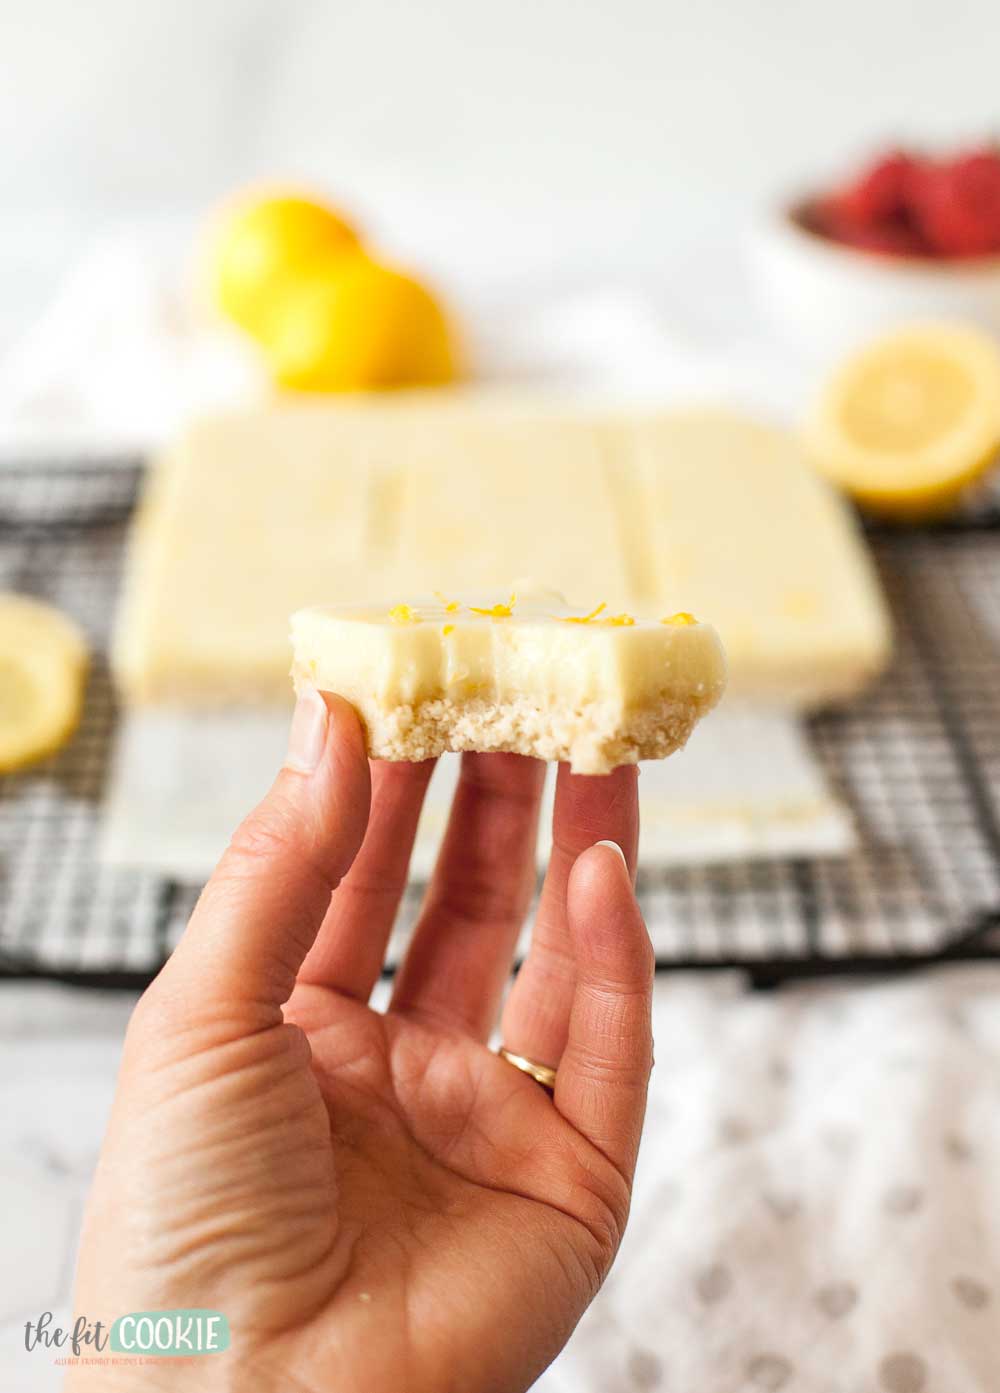 photo of a hand holding a lemon bar with a bite taken